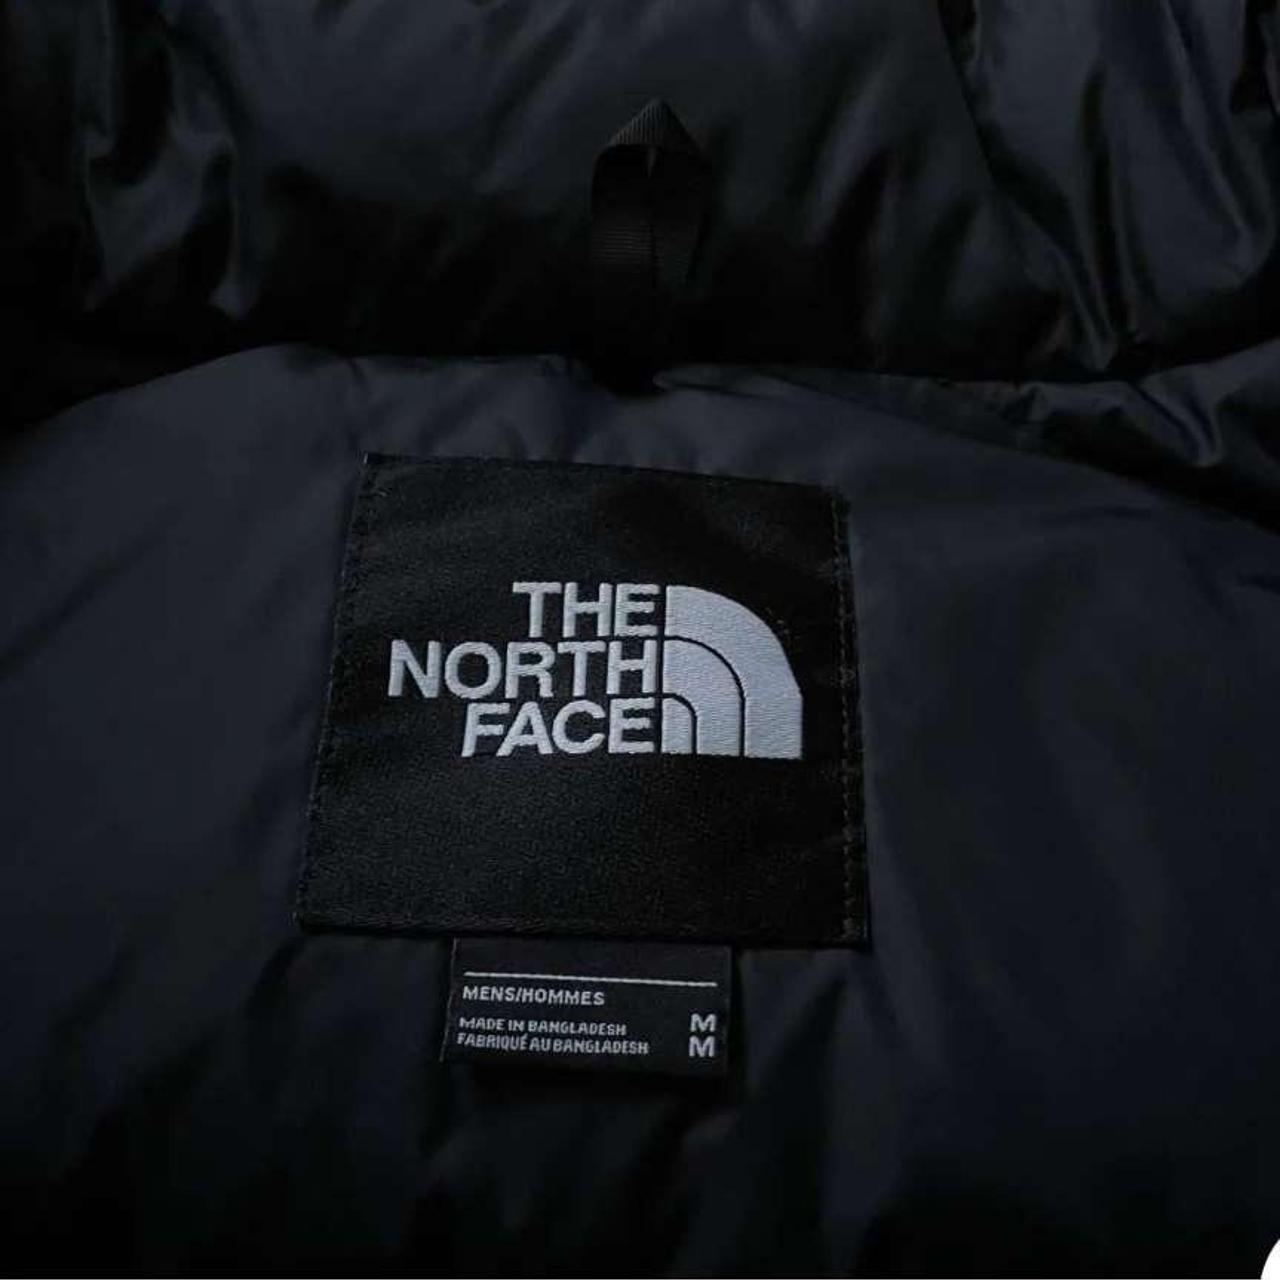 NORTH FACE JACKET IN GOOD CONDITION ON SALE... - Depop